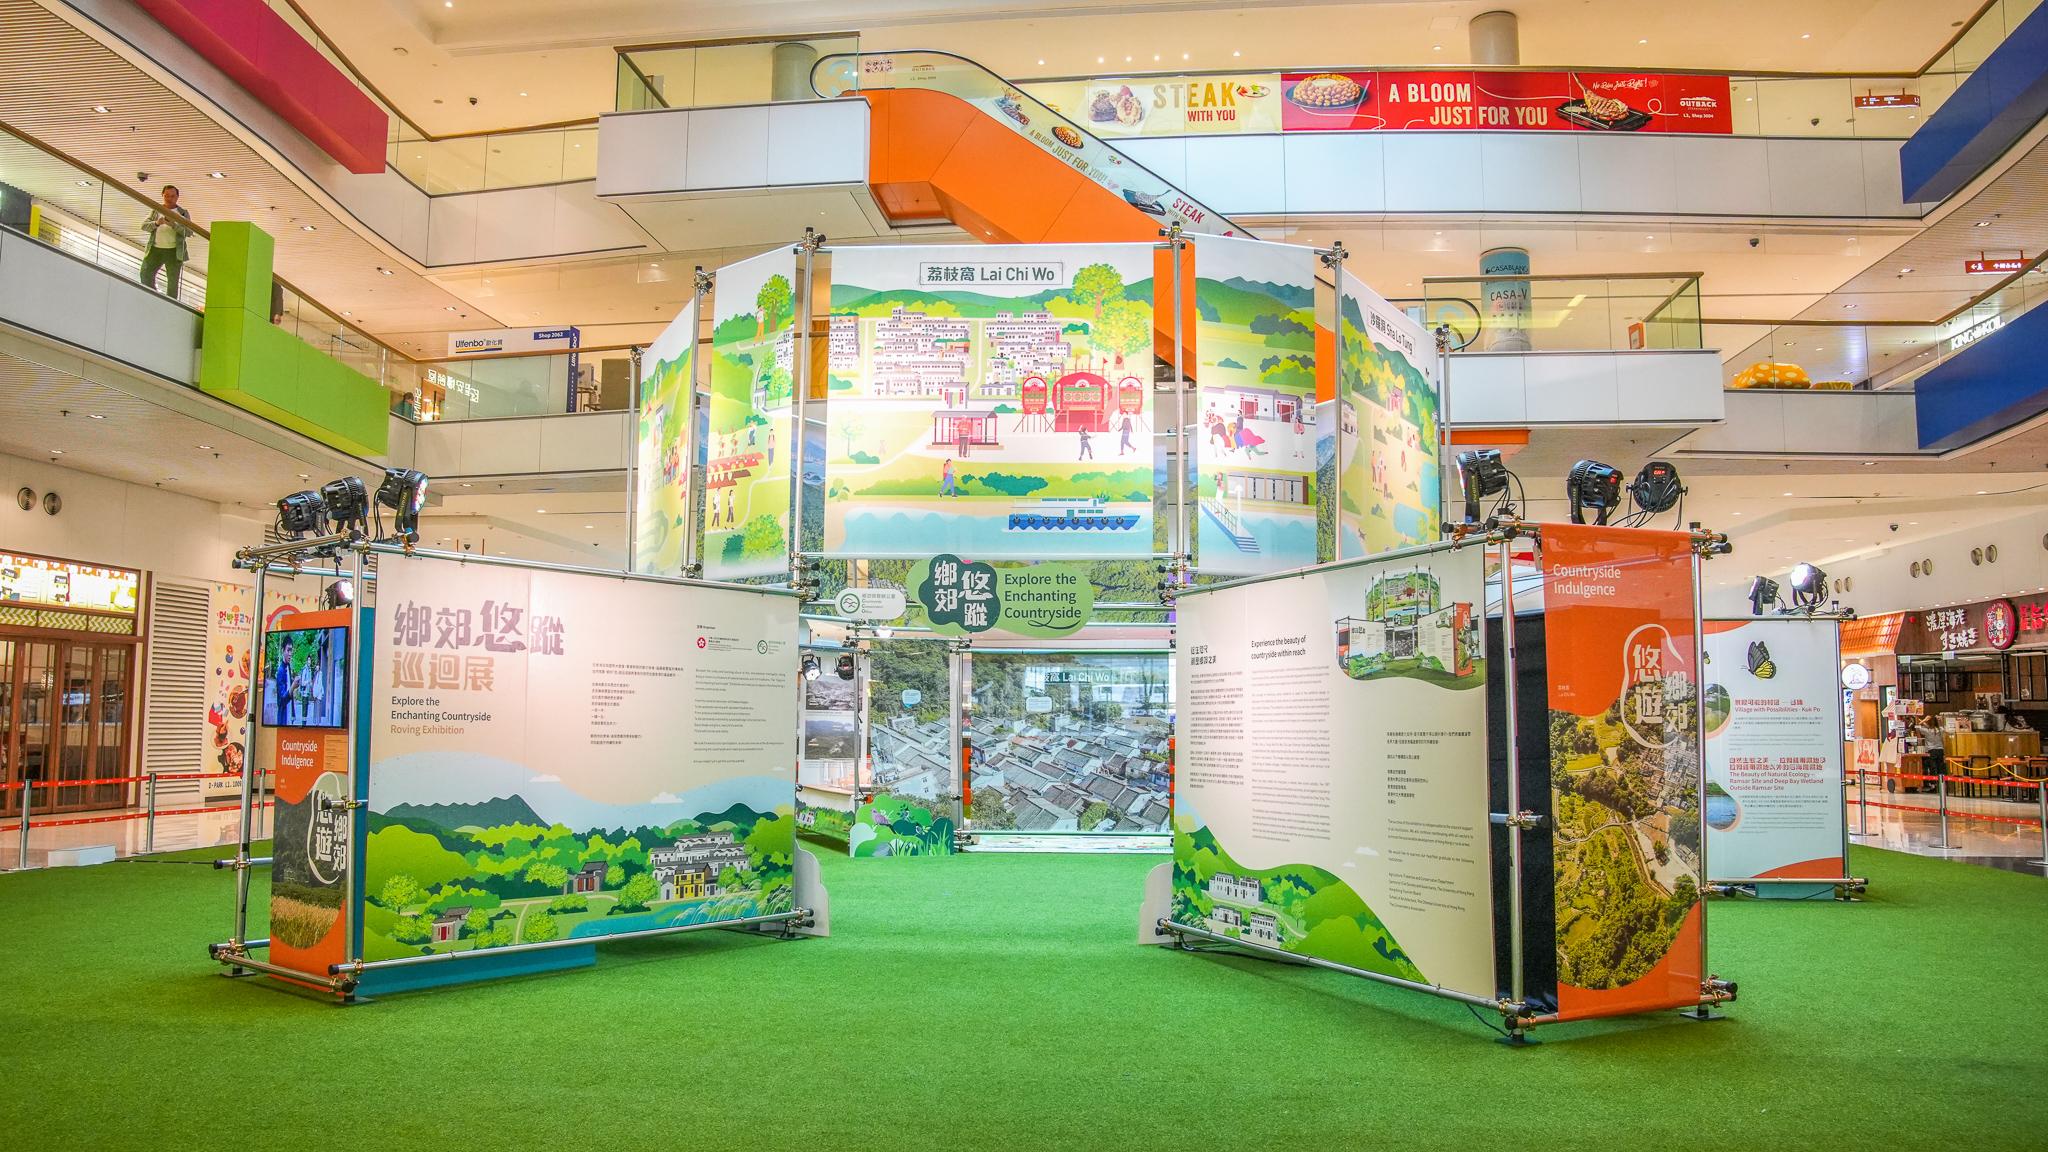 Organised by the Countryside Conservation Office, the roving exhibition entitled "Explore the Enchanting Countryside", will be launched tomorrow (February 20). The on-site games combine entertainment with education, allowing visitors to learn more about countryside revitalisation while having fun.